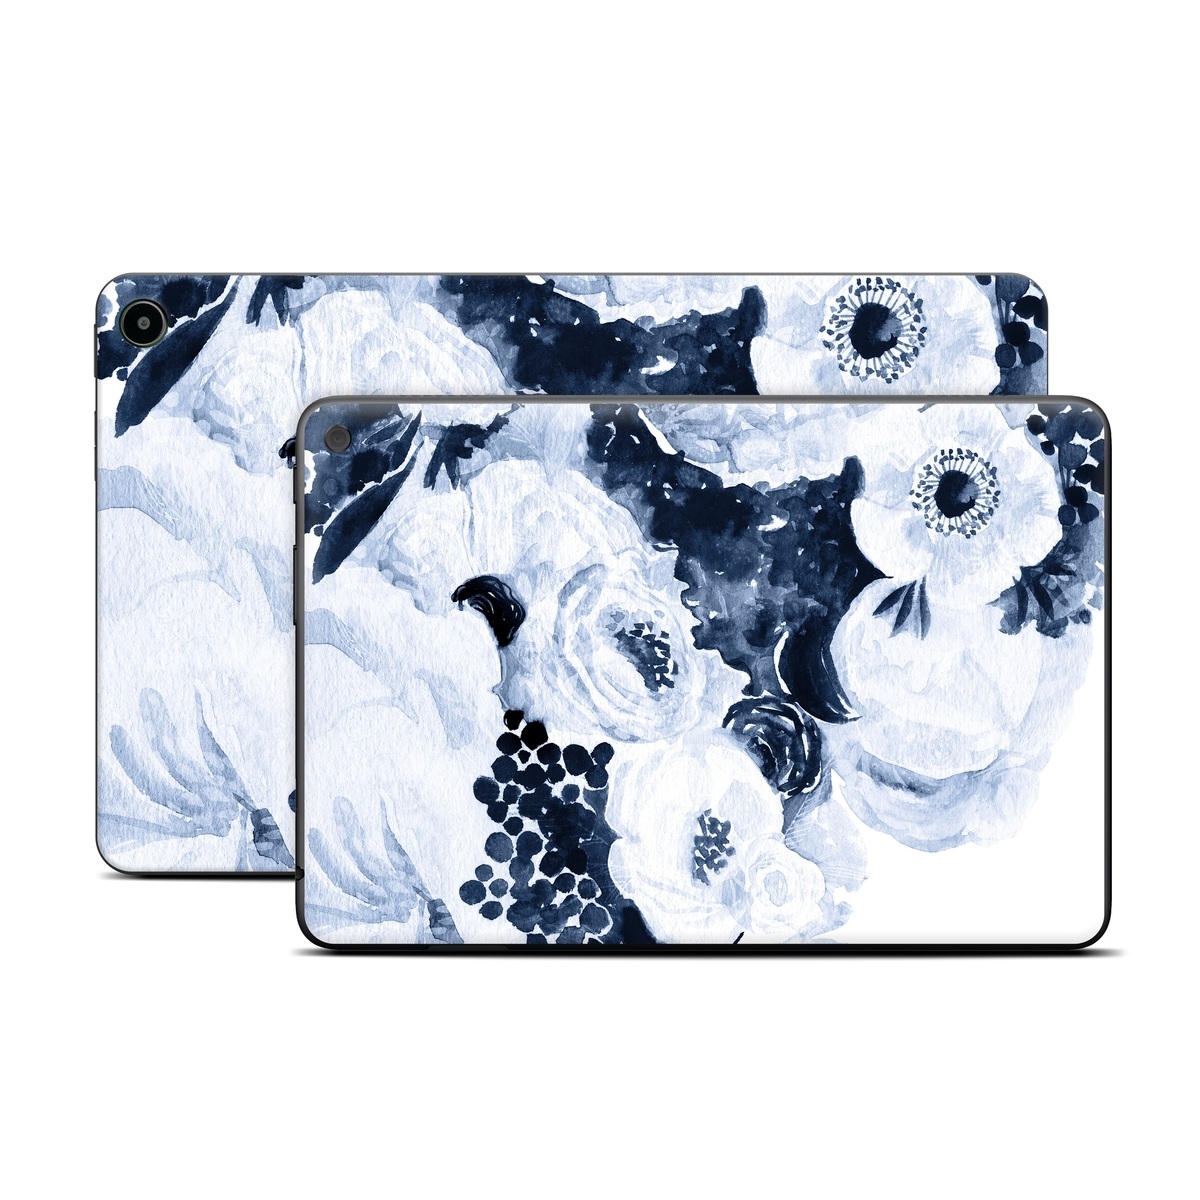 Amazon Fire Tablet Series Skin Skin design of White, Flower, Cut flowers, Garden roses, Plant, Bouquet, Rose, Black-and-white, Rose family, Still life, with white, blue colors